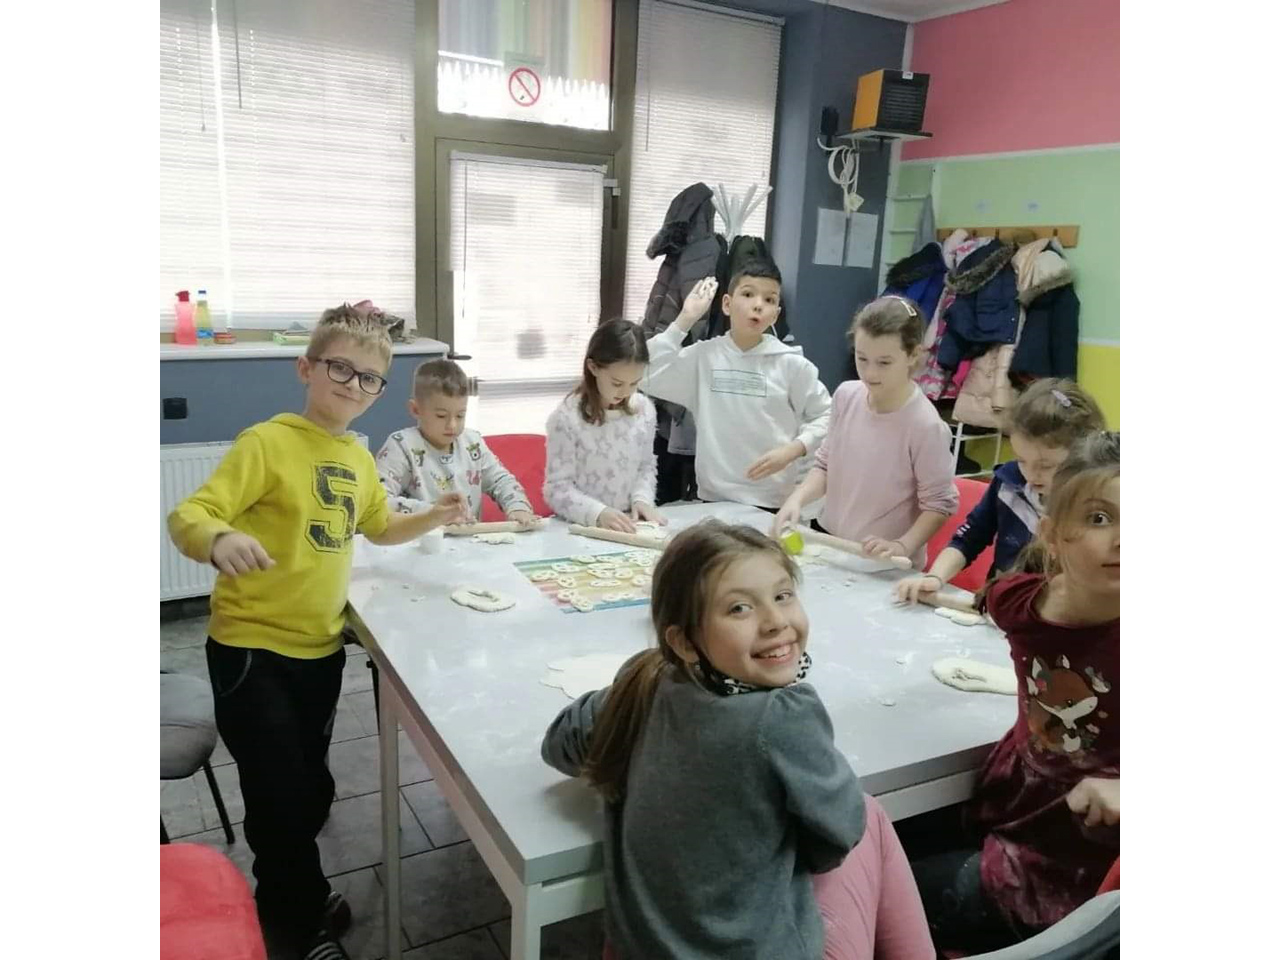 Photo 1 - EXTENDED STAY MY COOL SCHOOL 2 - Extended daycare for children, Pancevo